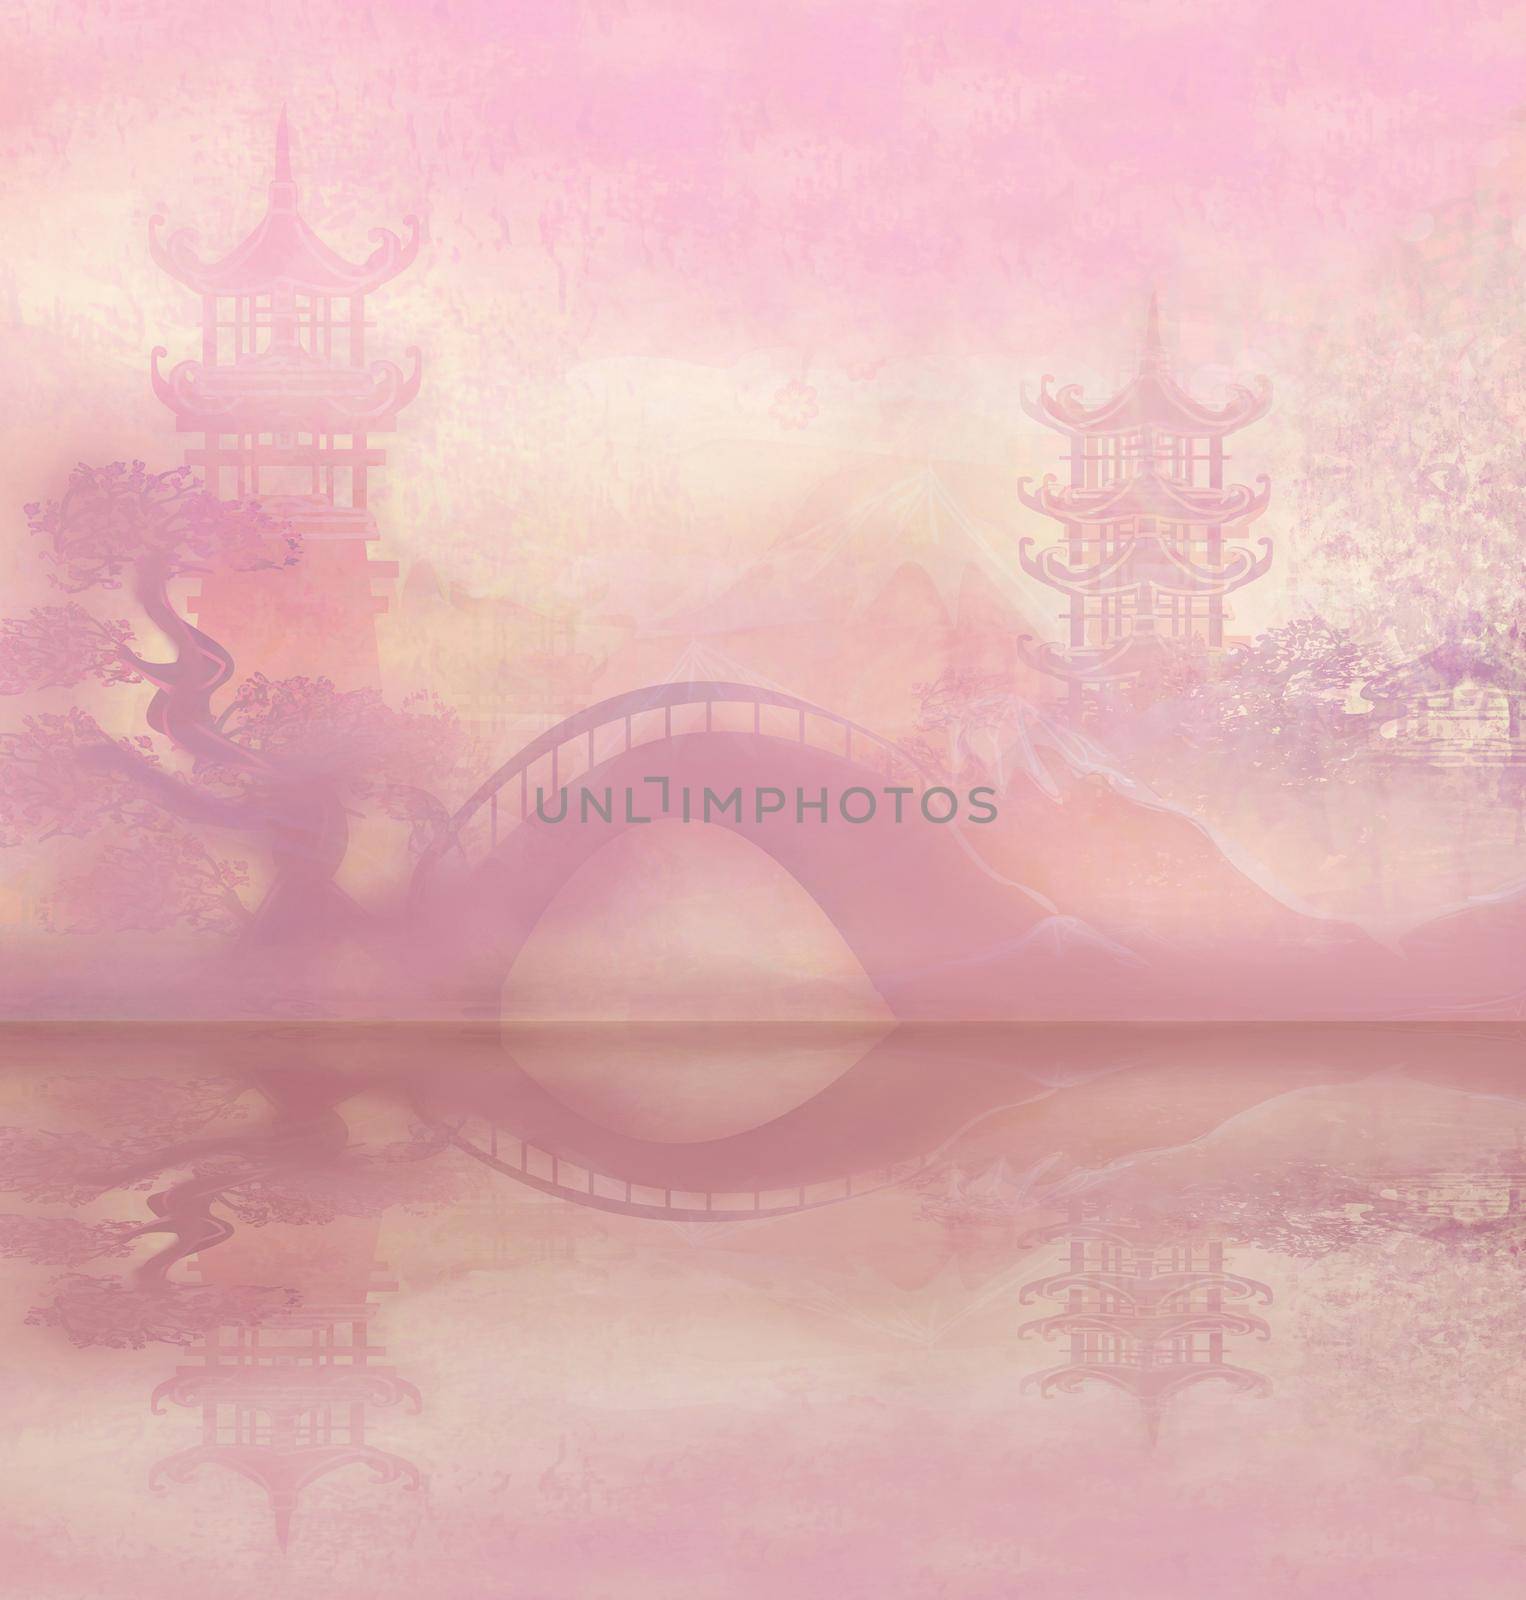 Abstract Asian temple Landscape